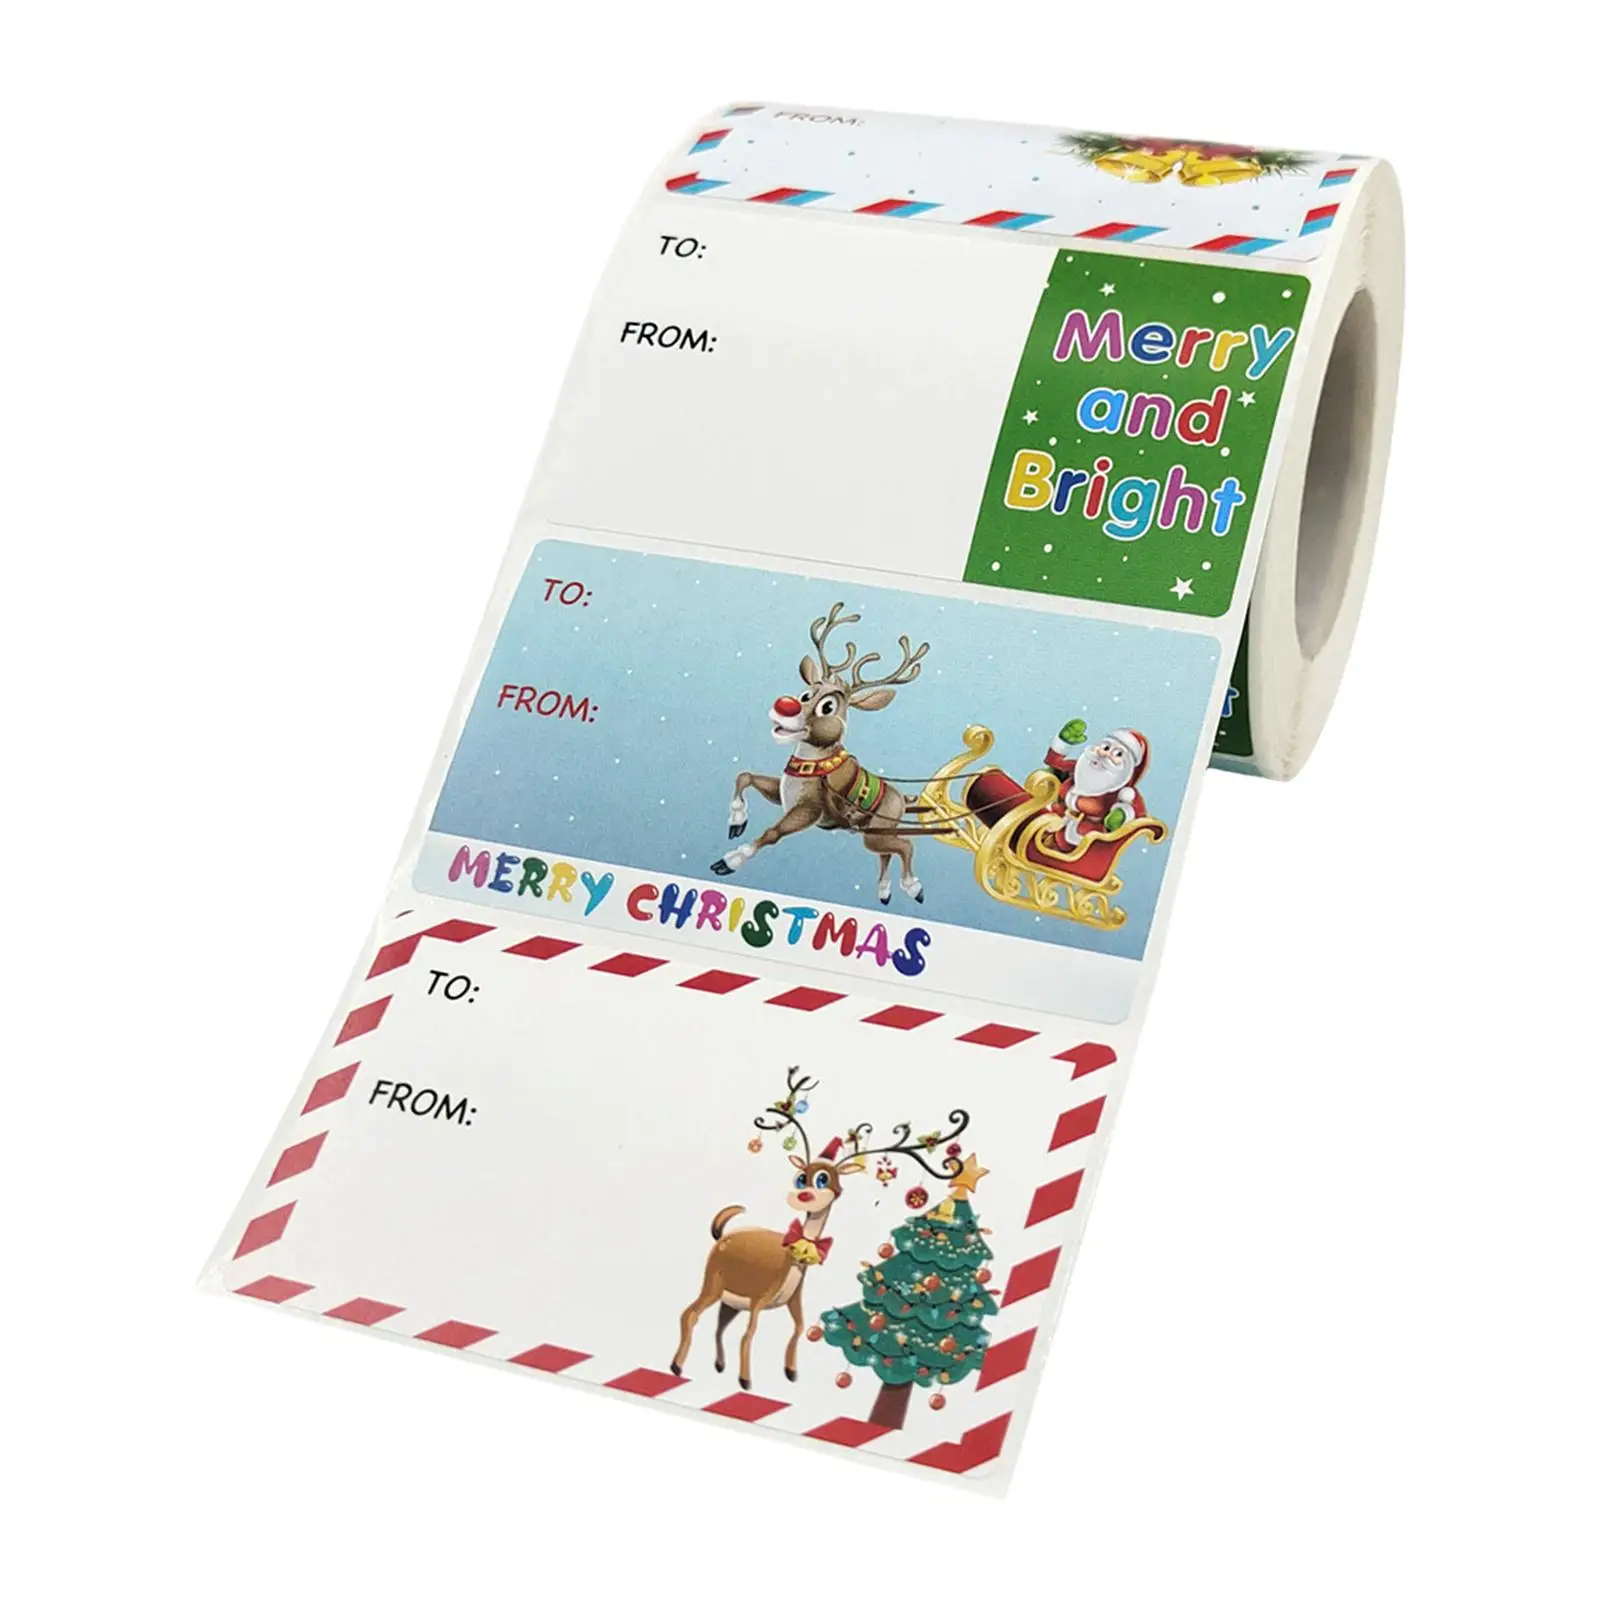 500x Christmas Tags Stickers Roll Sealing Stickers Self Adhesive Stickers for Birthdays Crafts Kids Gift Wrapping Scrapbooking